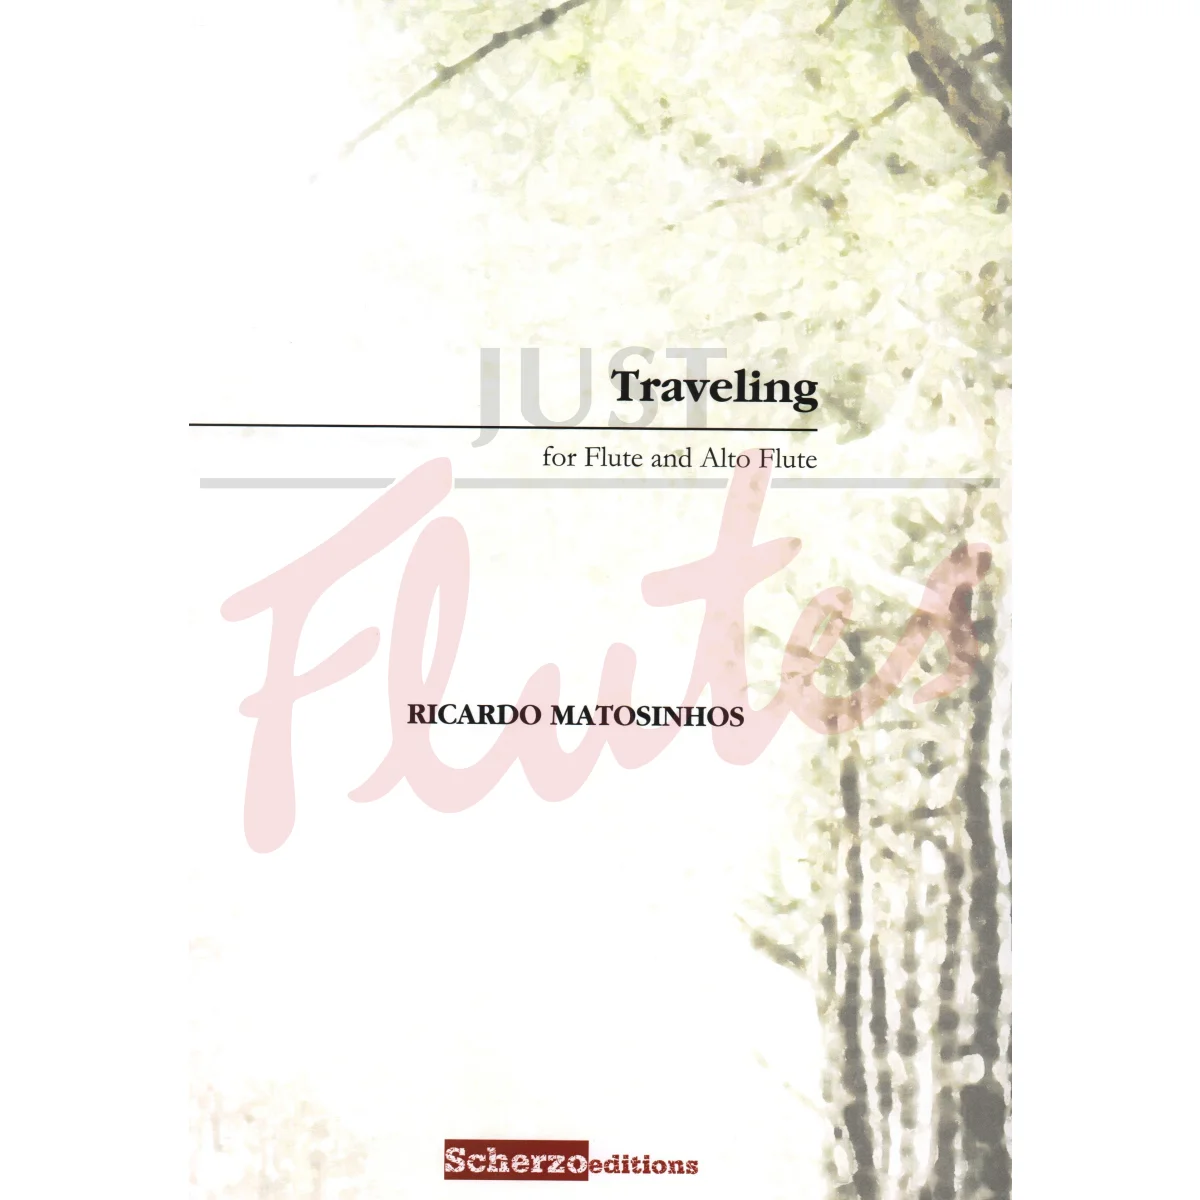 Traveling for Flute and Alto Flute